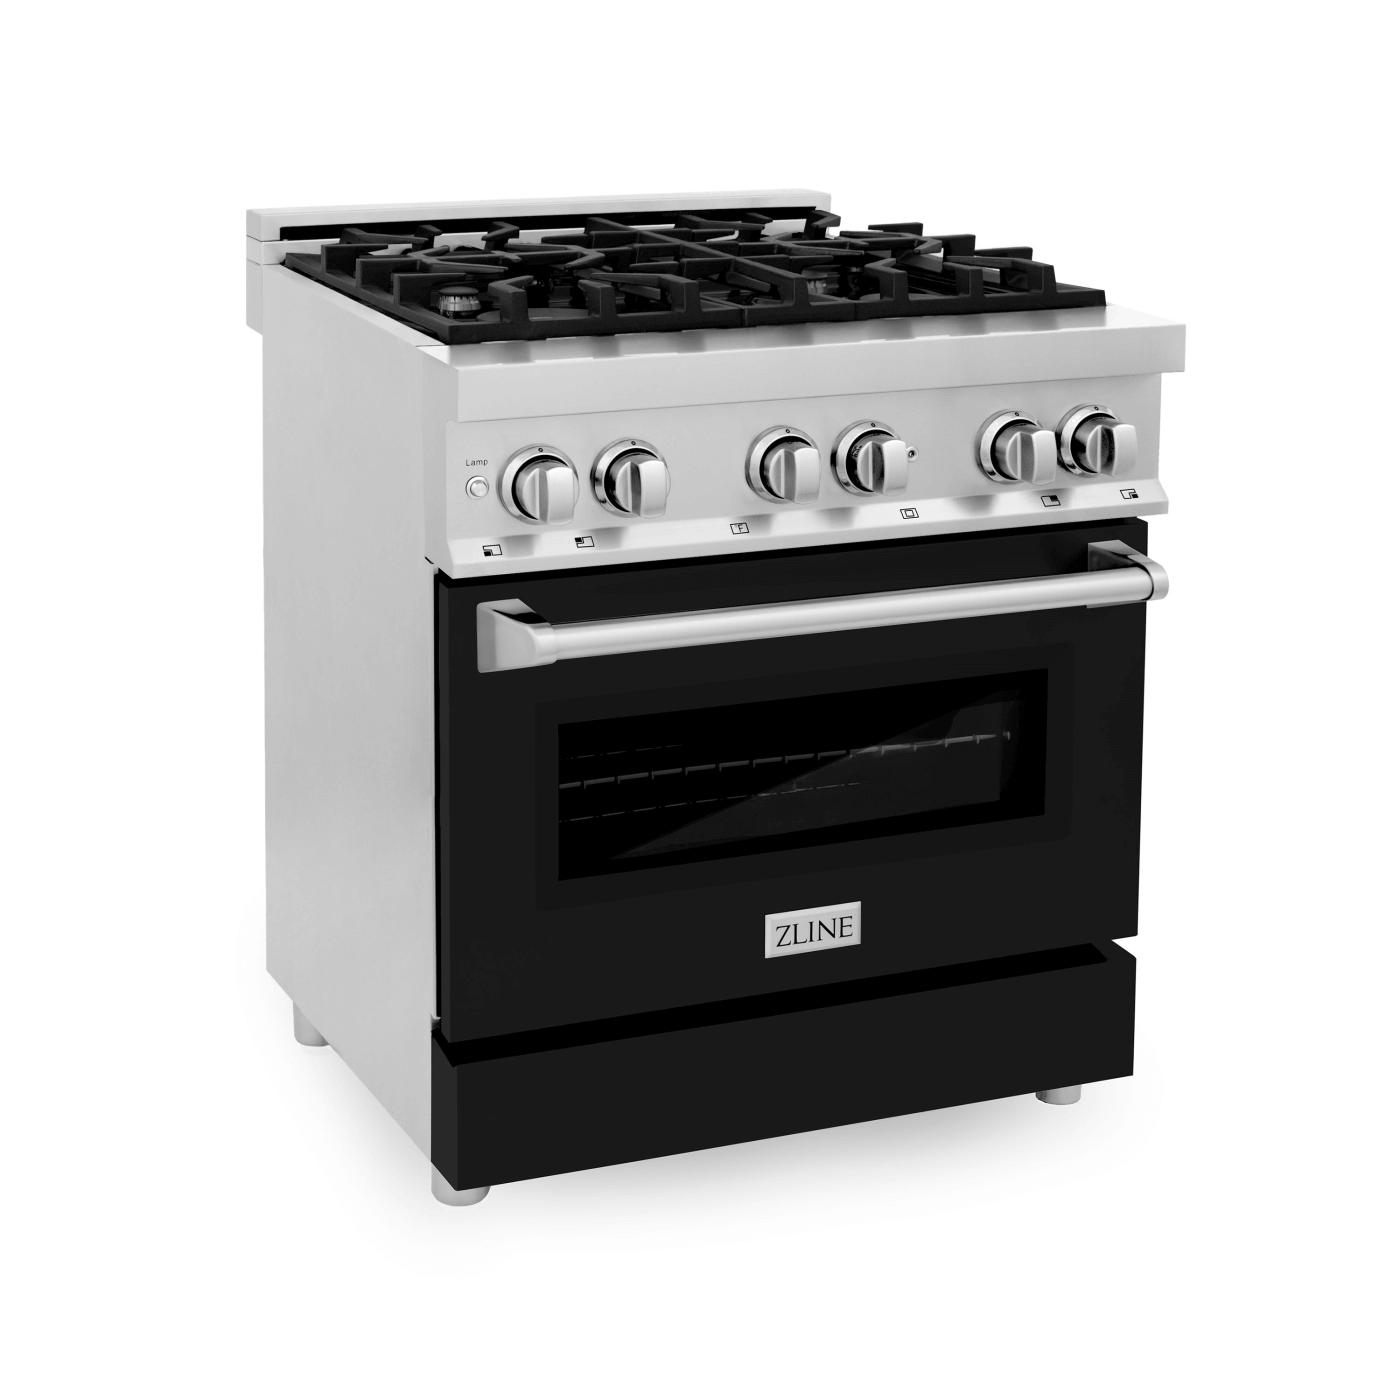 ZLINE 30 in. 4.0 cu. ft. Dual Fuel Range with Gas Stove and Electric Oven in Stainless Steel with Black Matte Door (RA-BLM-30) - white background